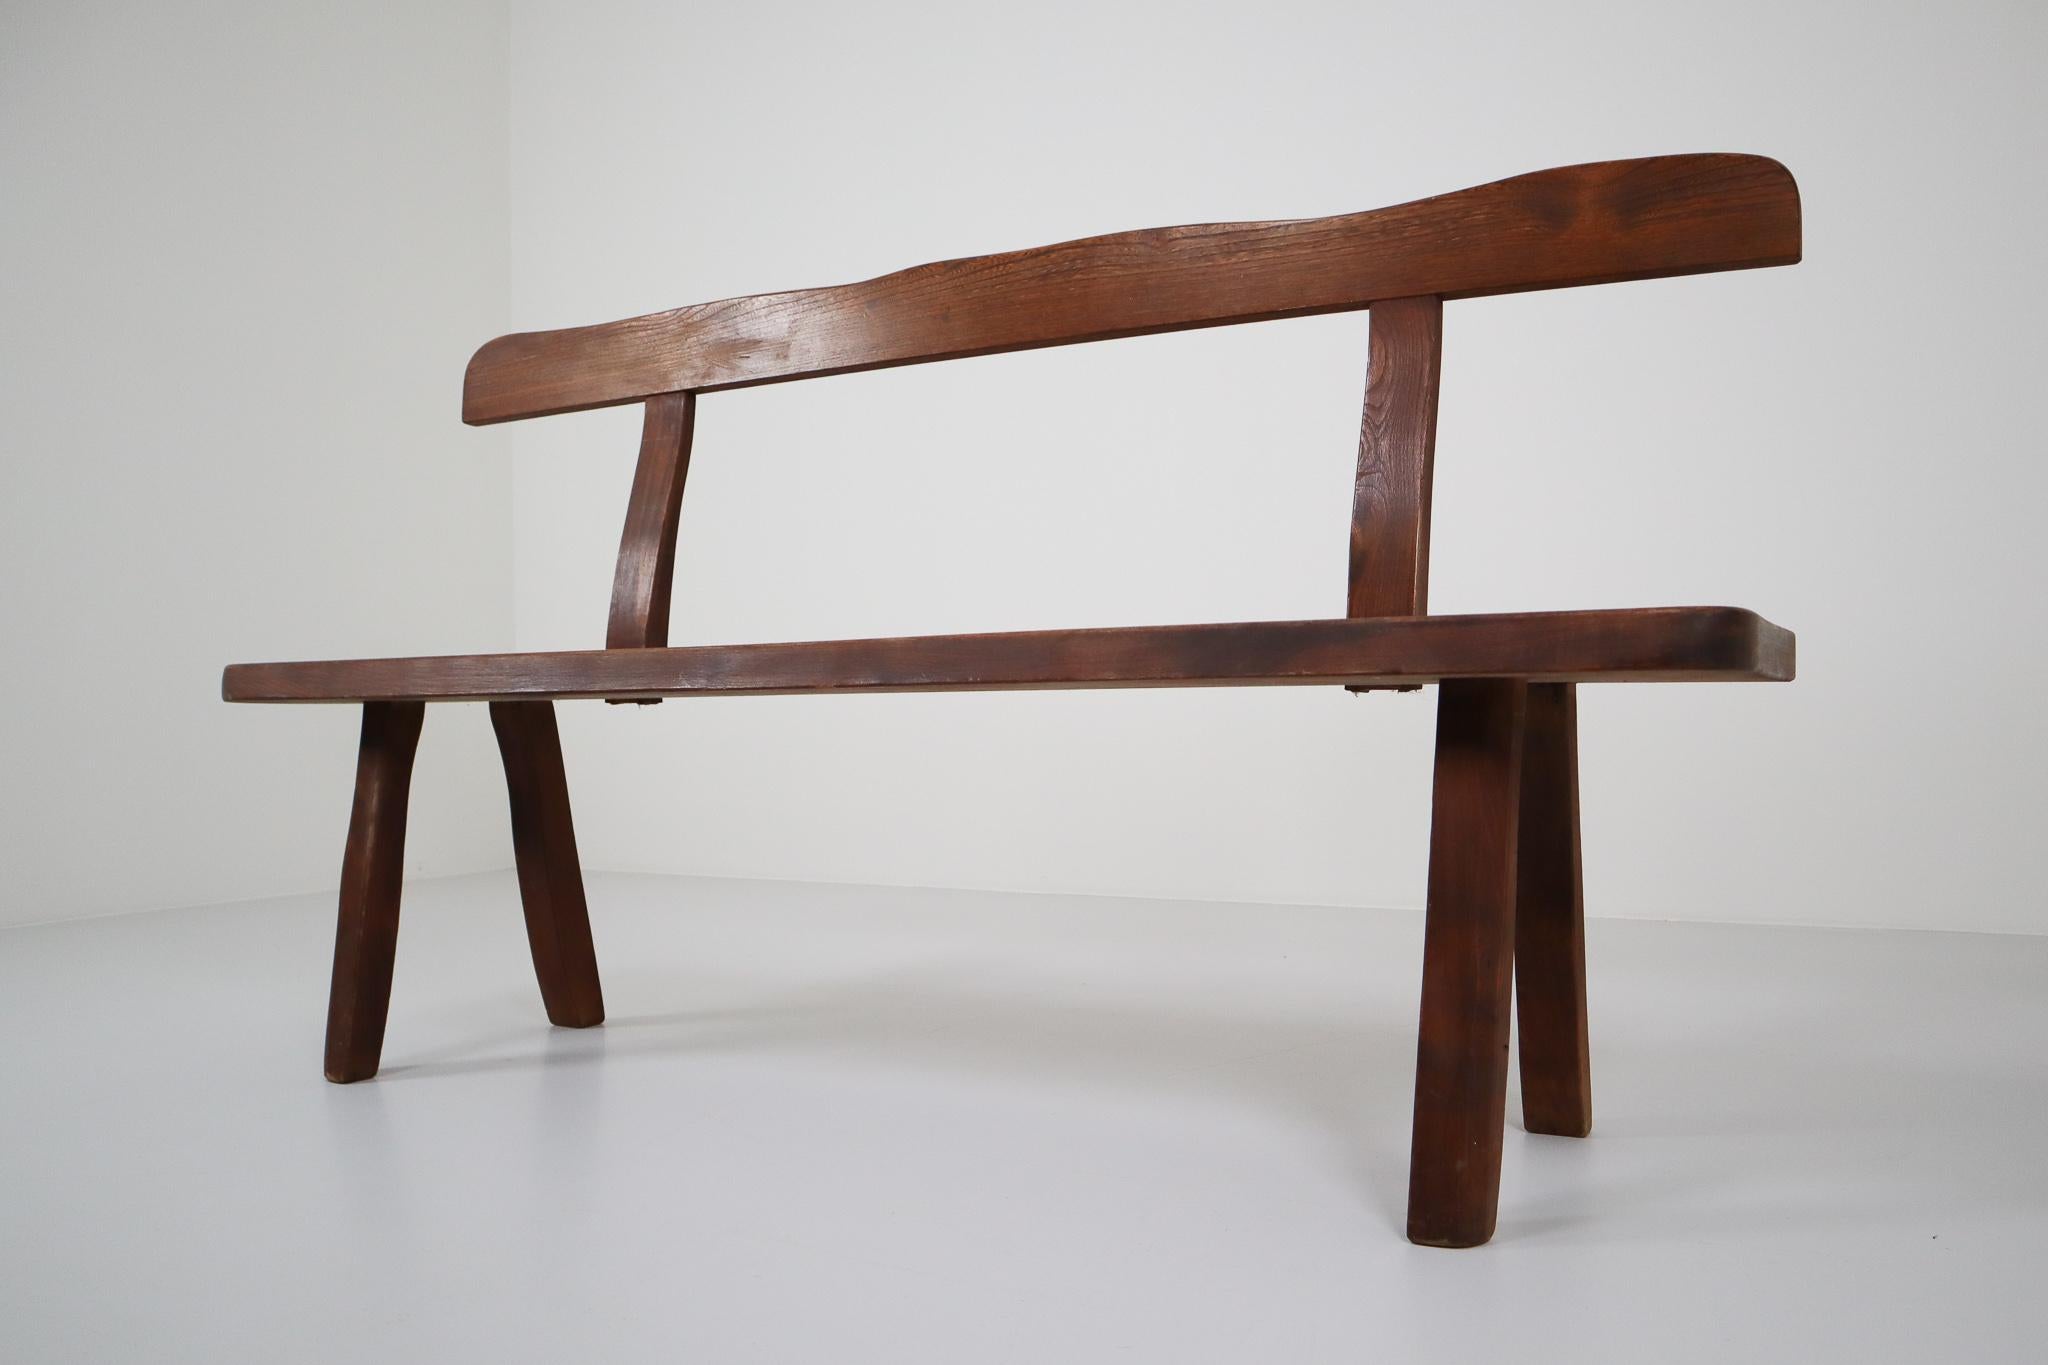 Robust sculptural bench designed by Olavi Hanninen and manufactured by Mikko Nupponen. This bench is made of stained elmwood and sculpturally crafted by hand very minimalistic, yet Brutalistic shaped and in very good original condition. The Finnish